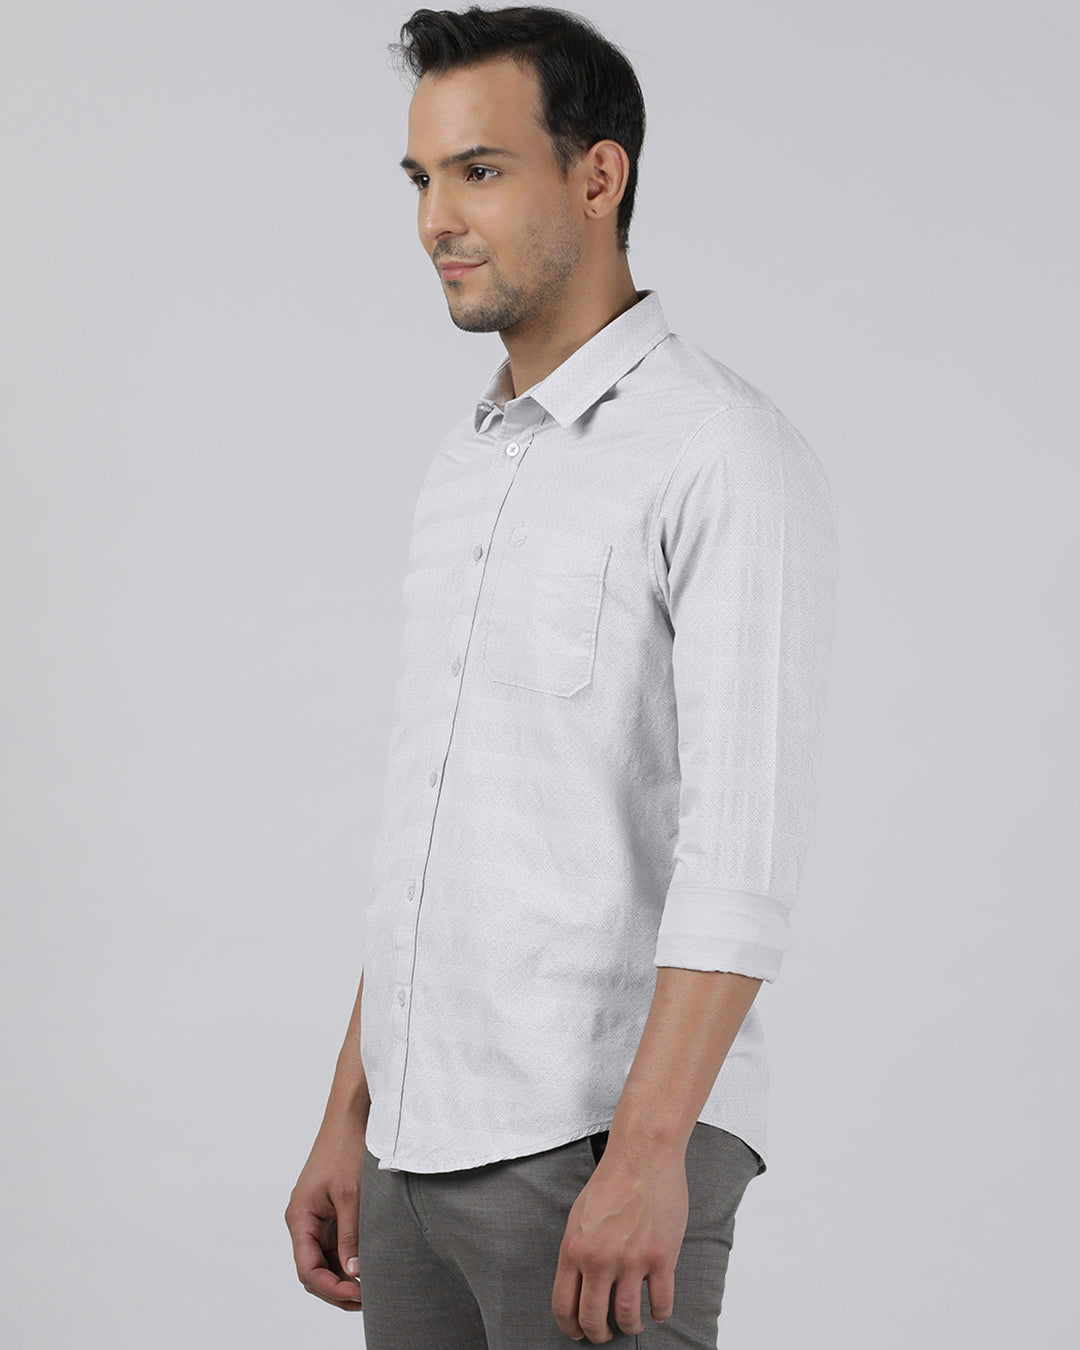 Casual Grey Full Sleeve Regular Fit Print Shirt with Collar for Men